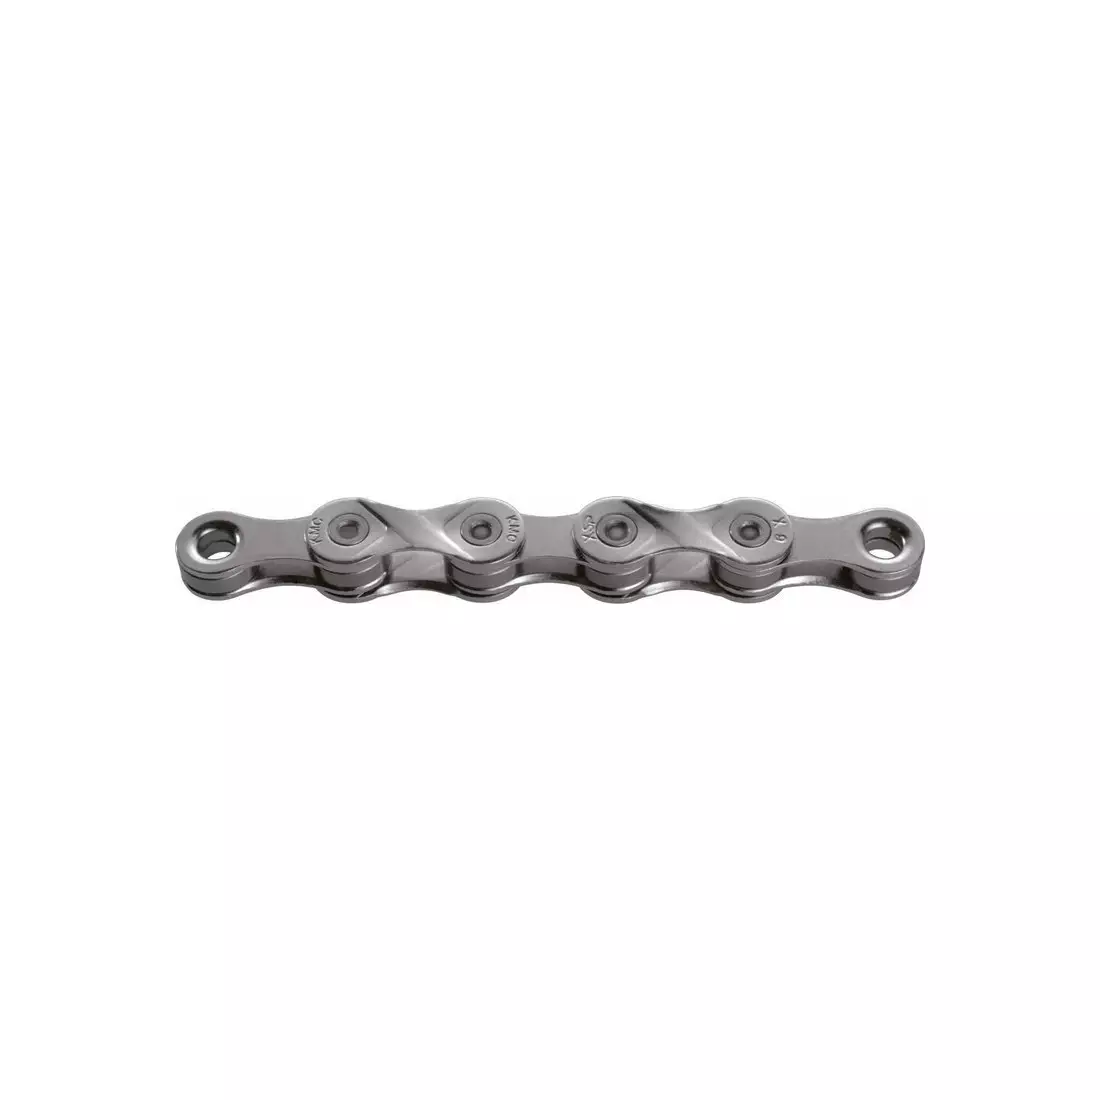 KMC X9 EPT bicycle chain 9-speed, 114 links, silver